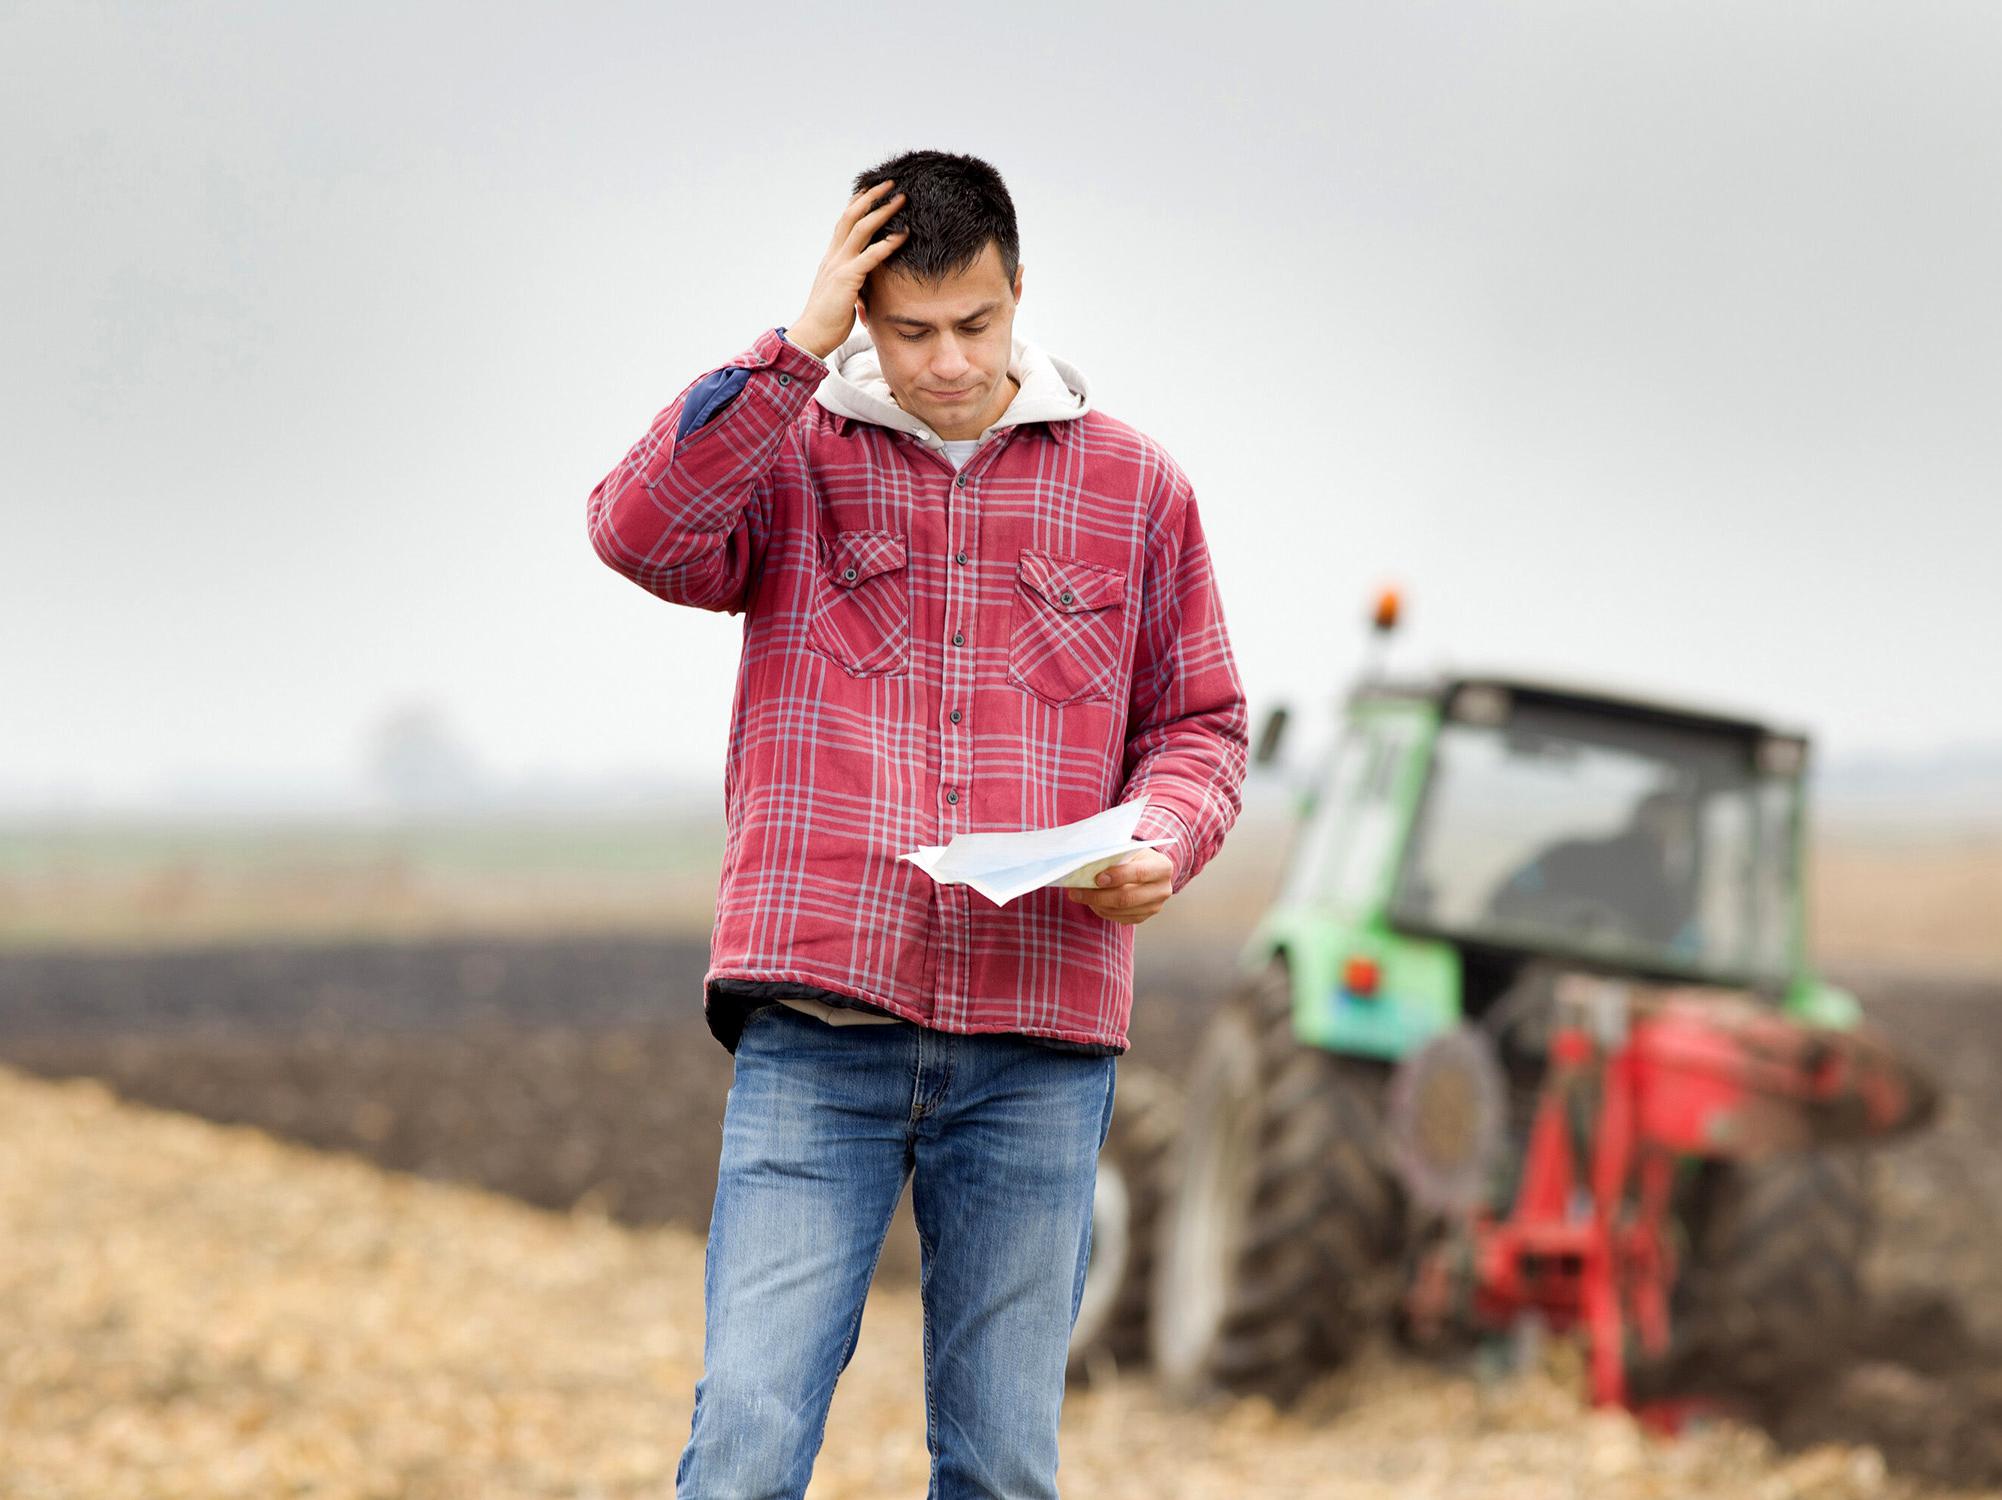 A farmer stands with a tractor in the background looking at a document and holding a hand to his head in worry.